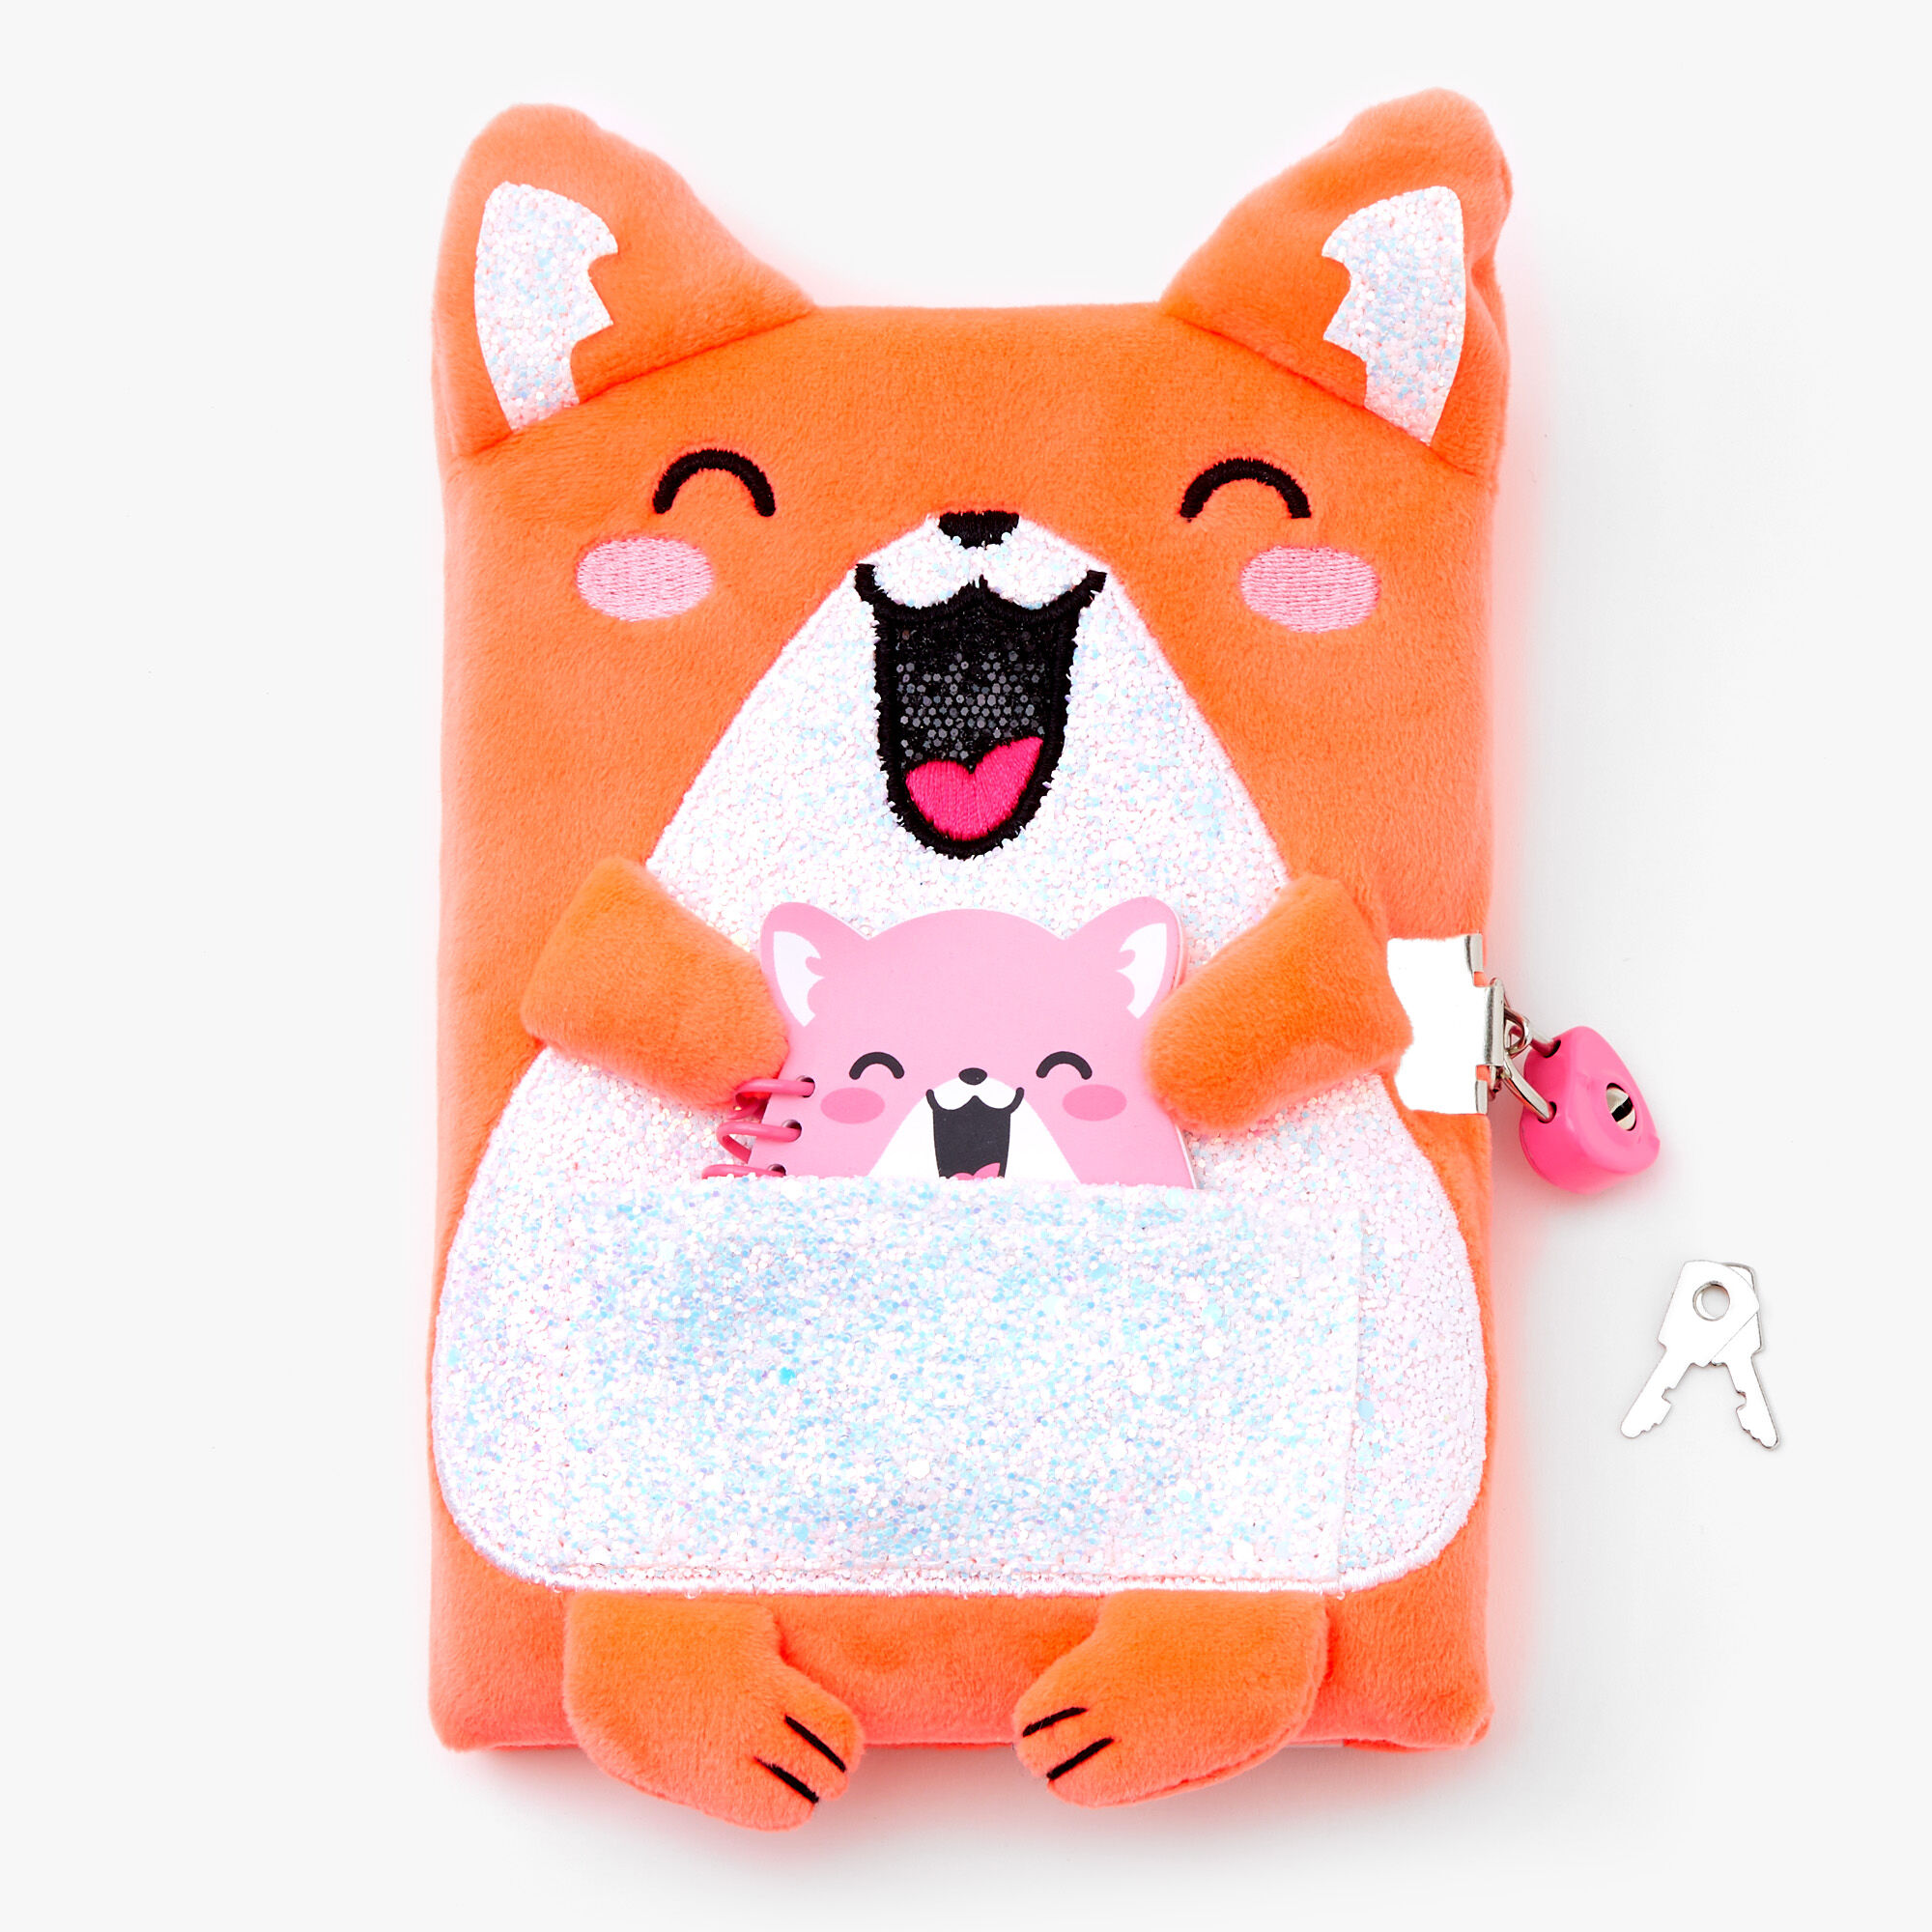 Claire's Orange Hamster Girls Diary with Lock and Key - Plush